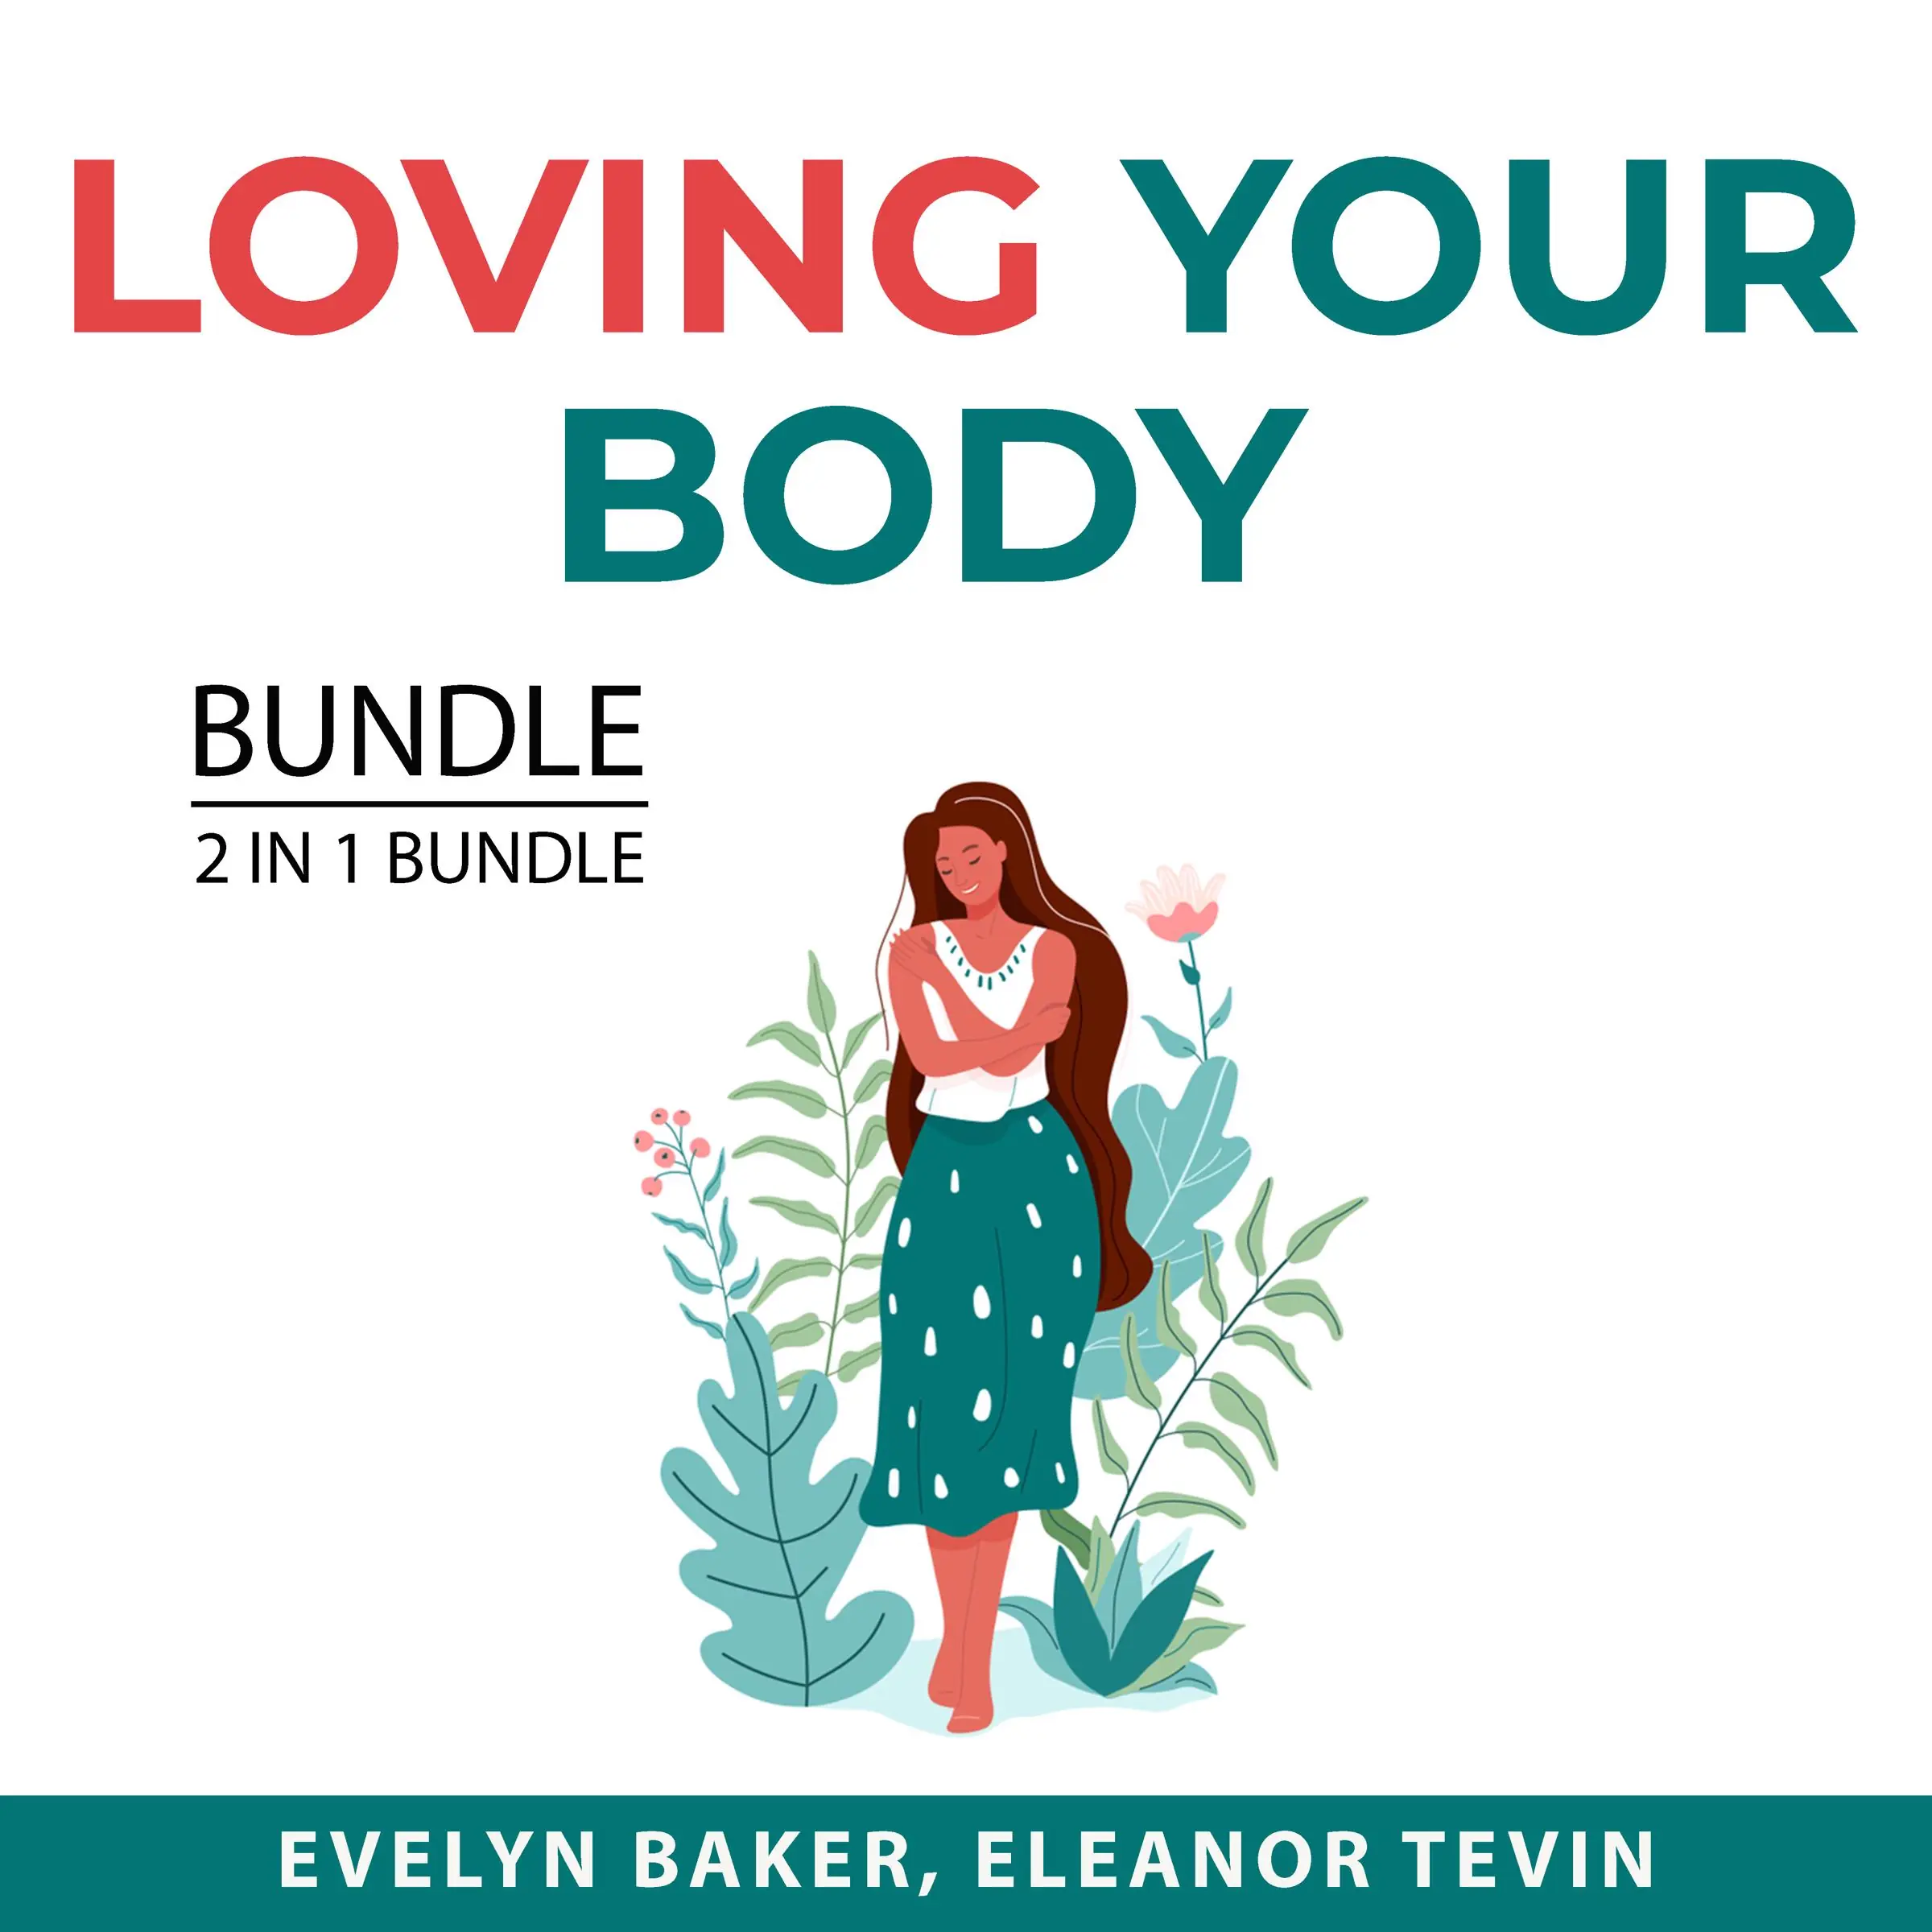 Loving Your Body Bundle, 2 in 1 Bundle: Body Love and Eat Better Audiobook by and Eleanor Tevin